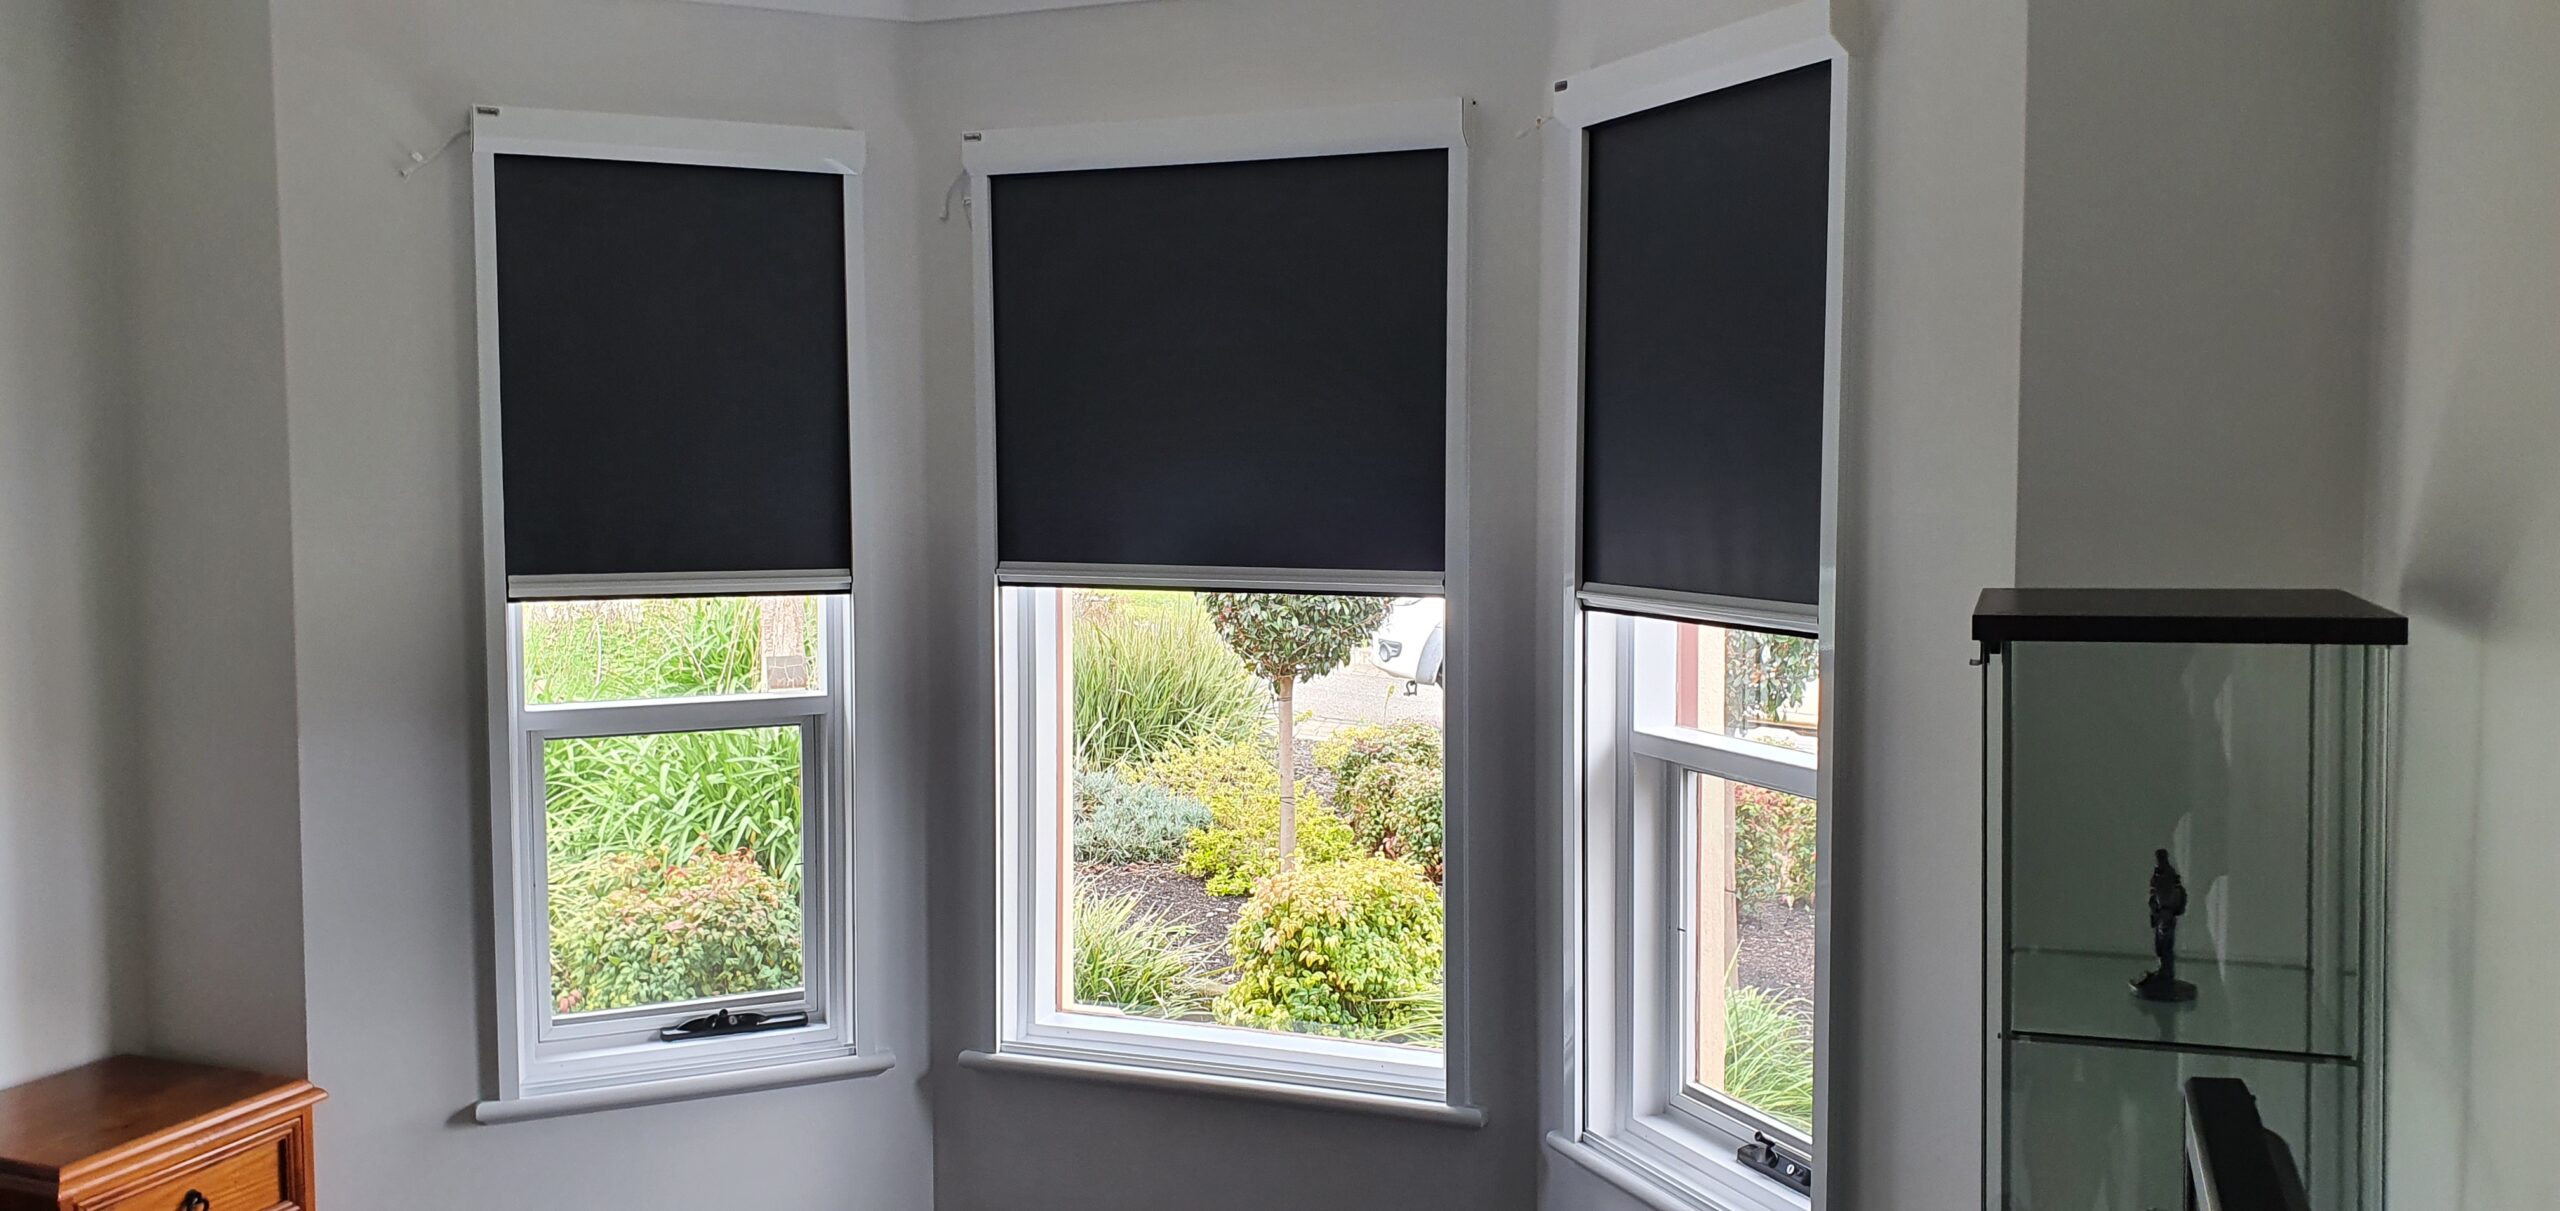 ScreenAway automated blackout blinds